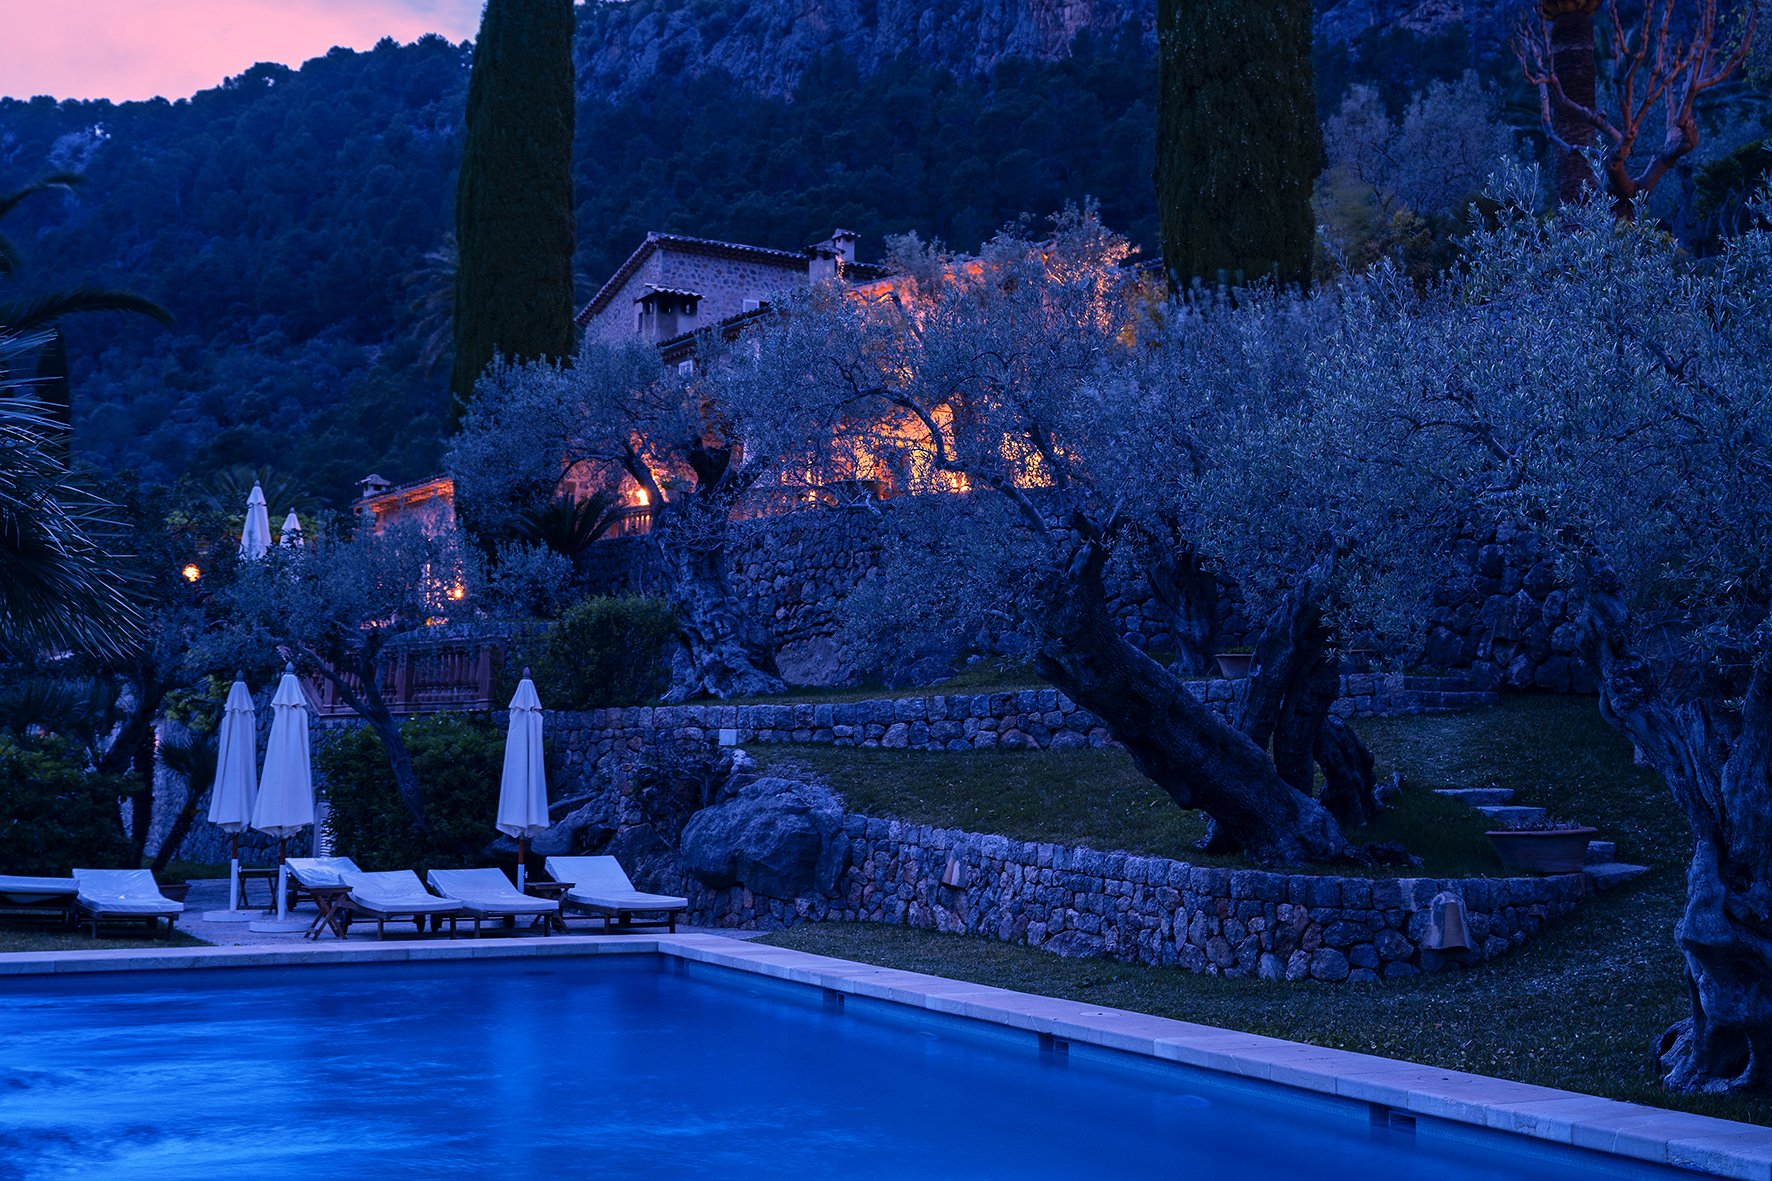 Finca Son Salas in Mallorca at blue hour seen with pool in foreground, with warm lights inside stone house, surrounded by olive trees on hillside.jpg